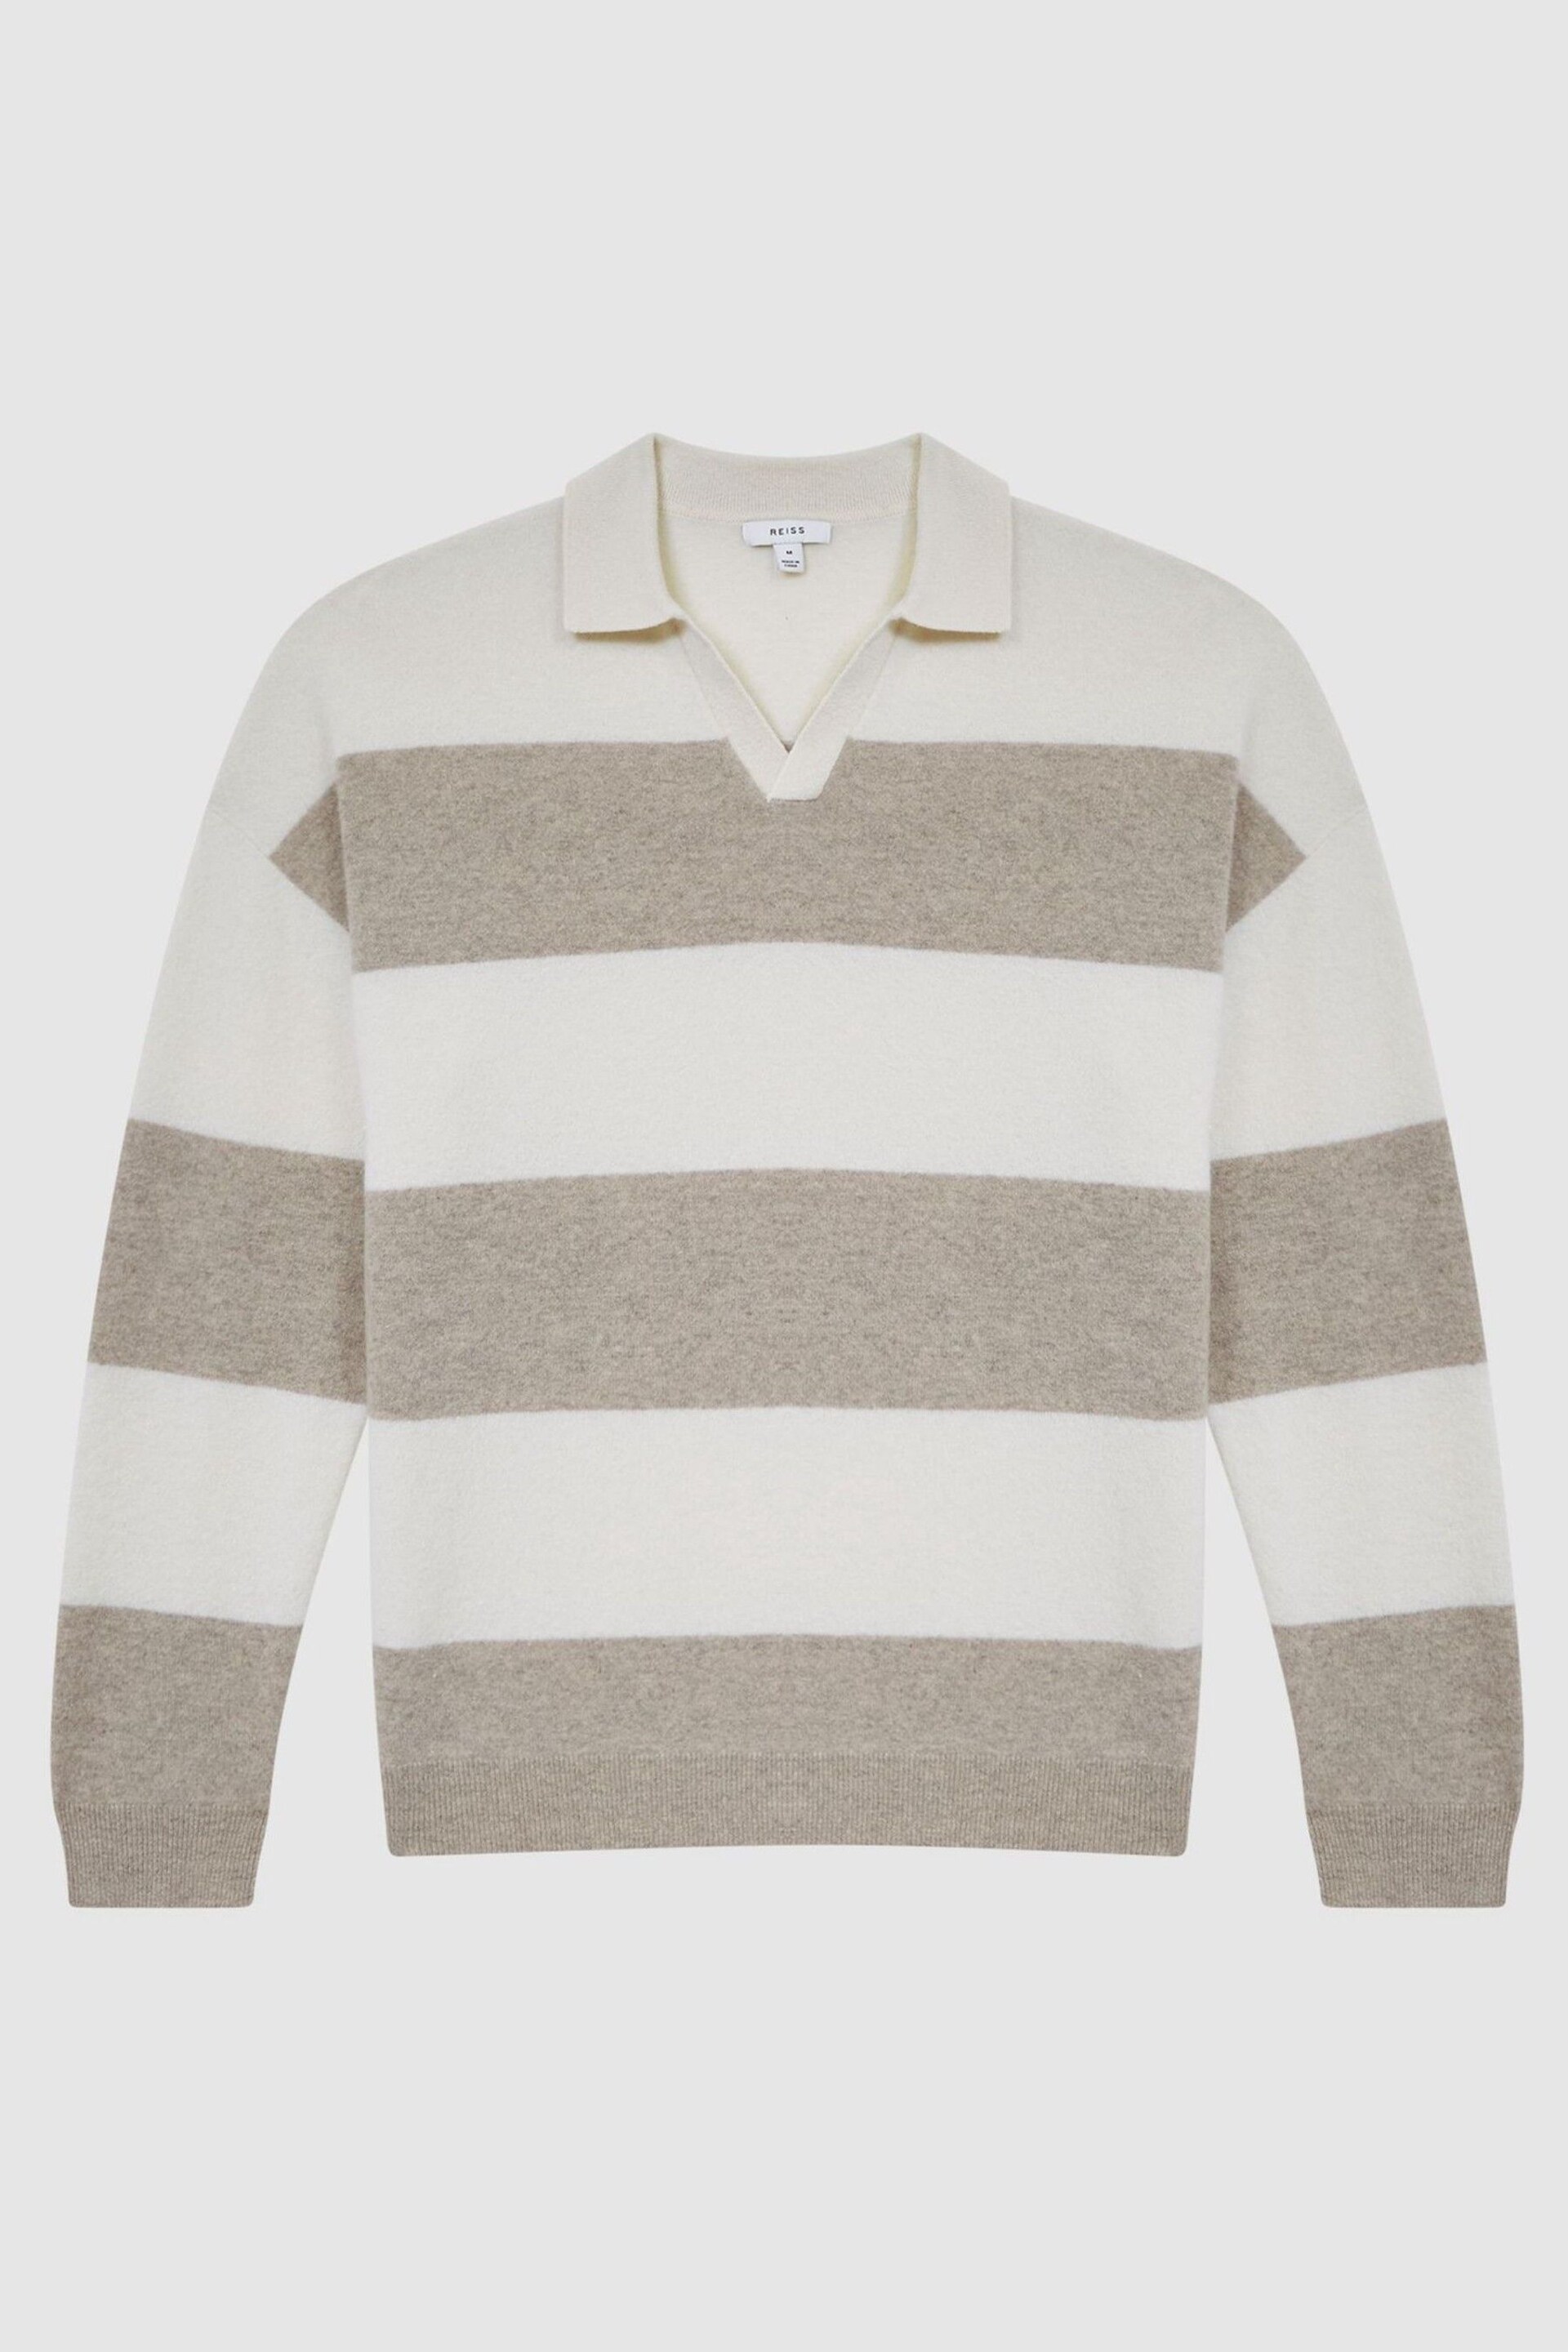 Reiss Heather / Ecru Port Striped Wool Rugby Shirt - Image 2 of 6